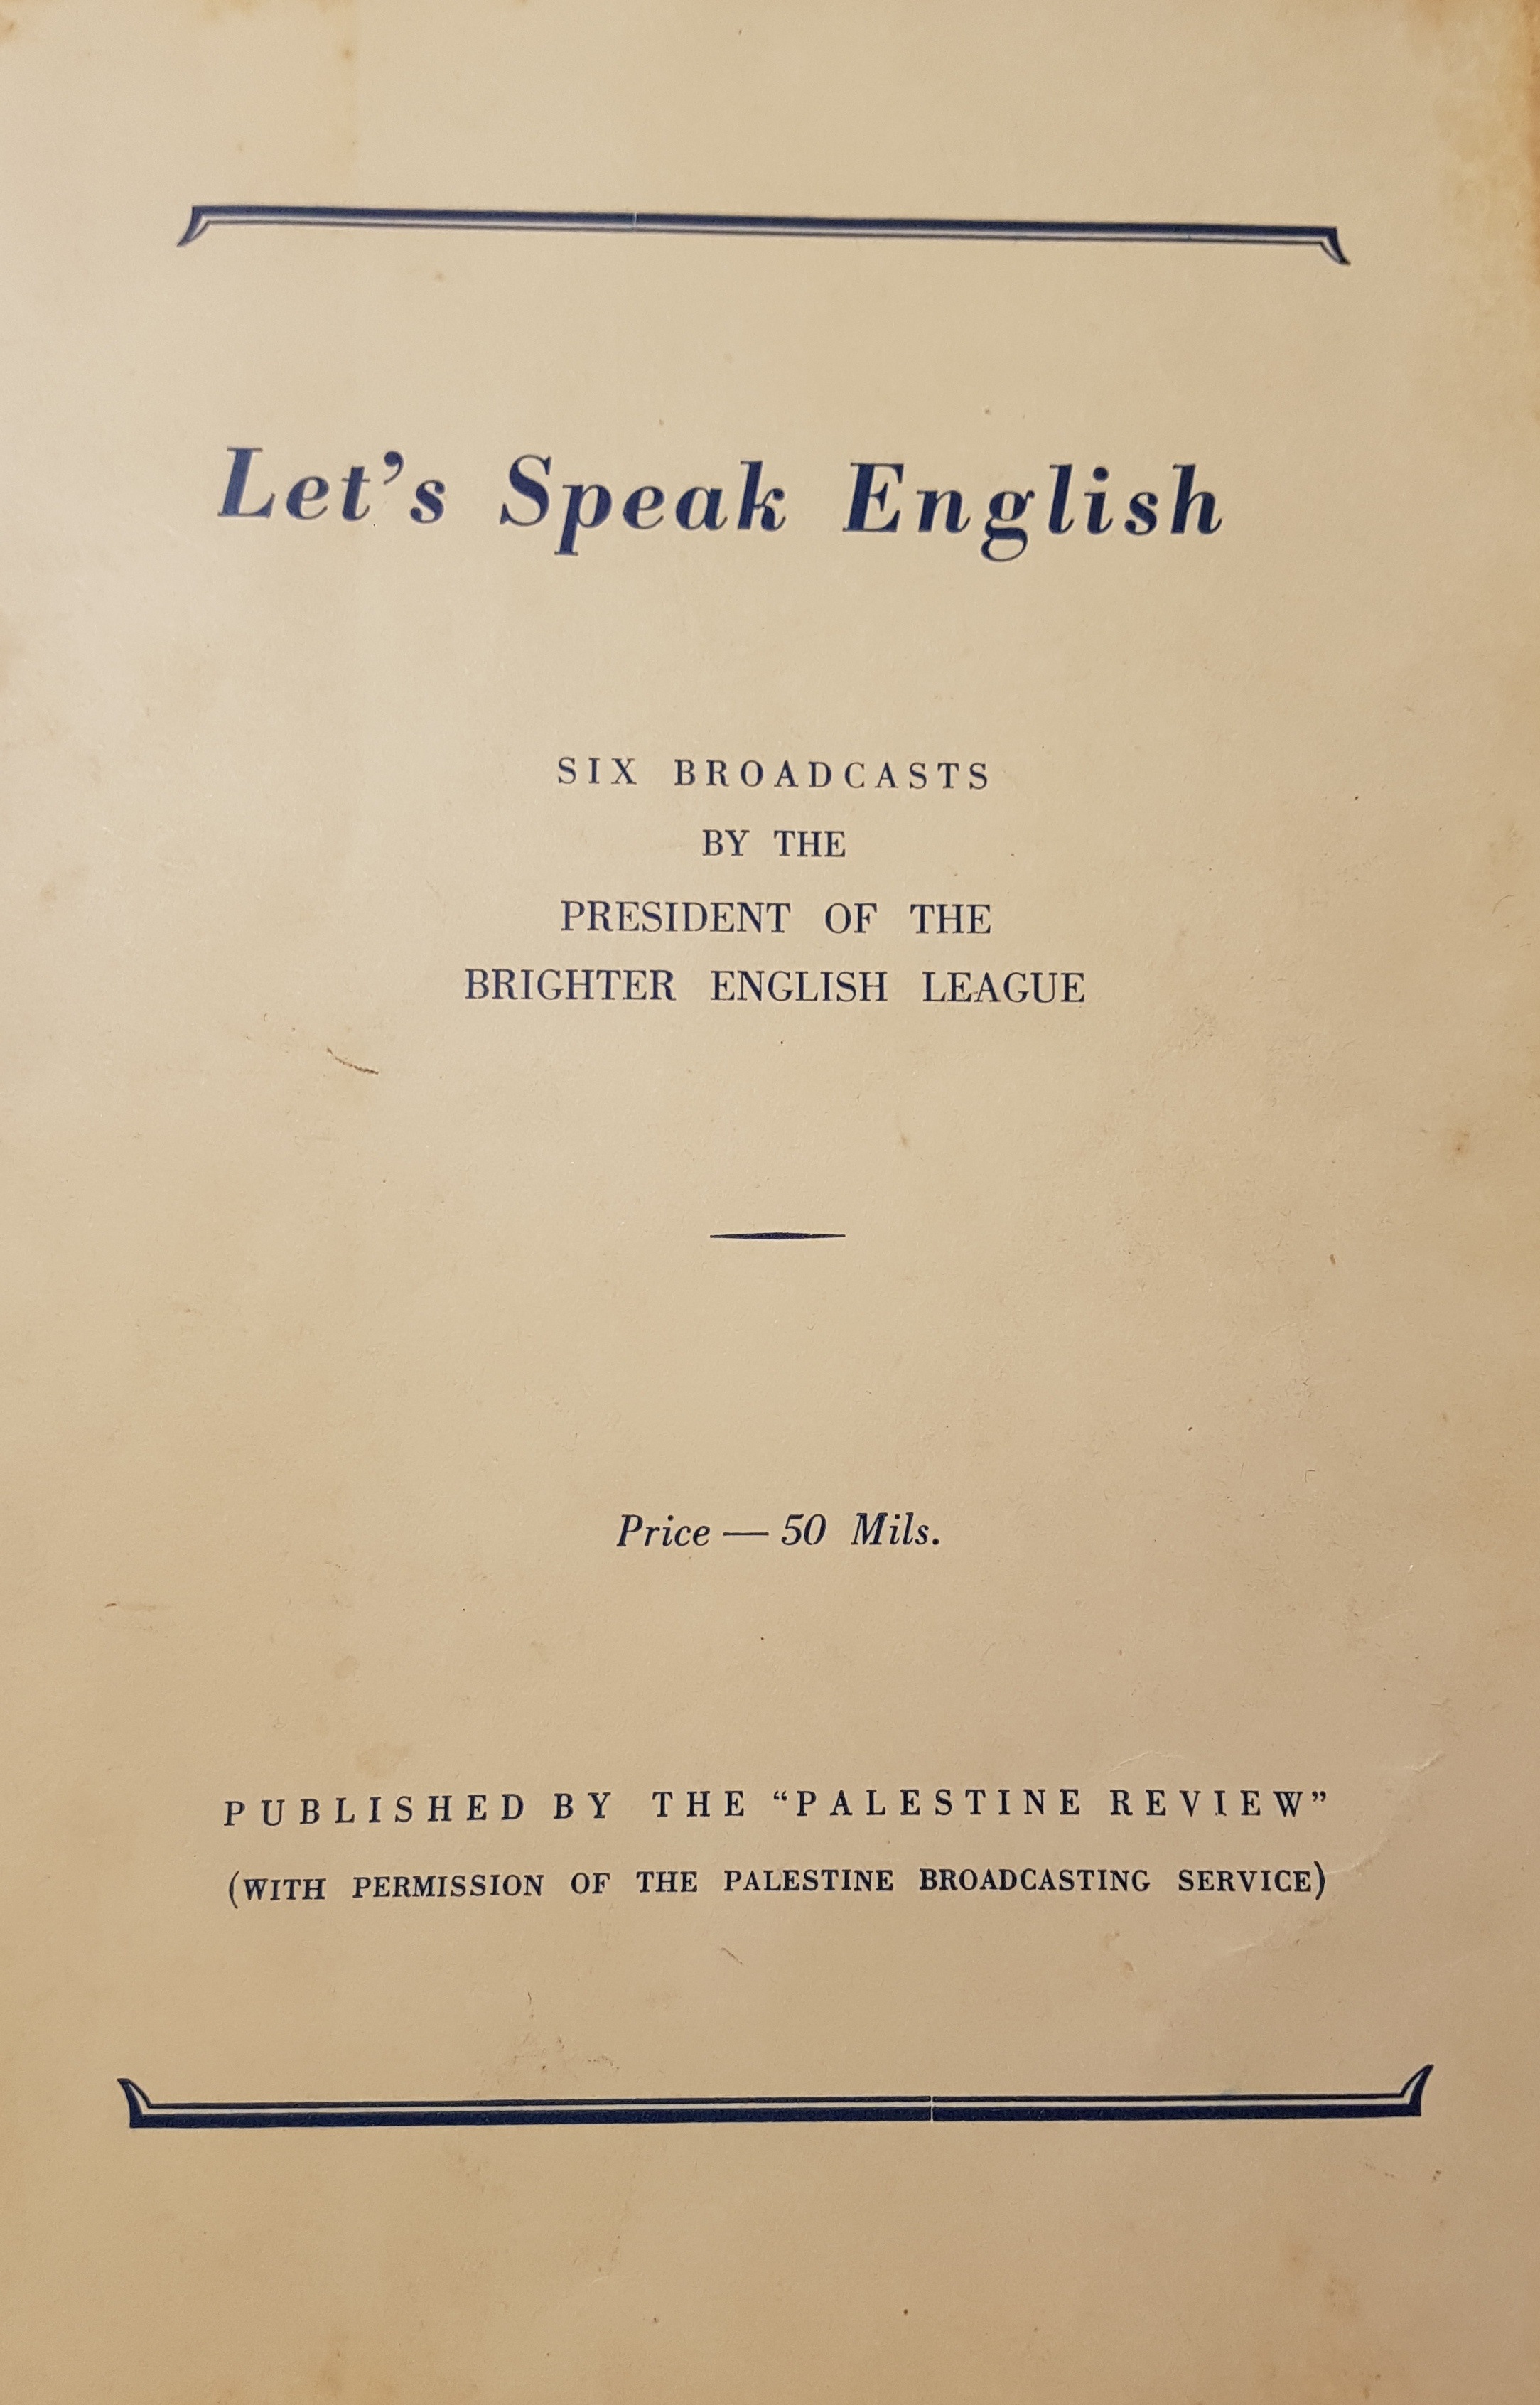   Photo: Let's Speak English Front cover